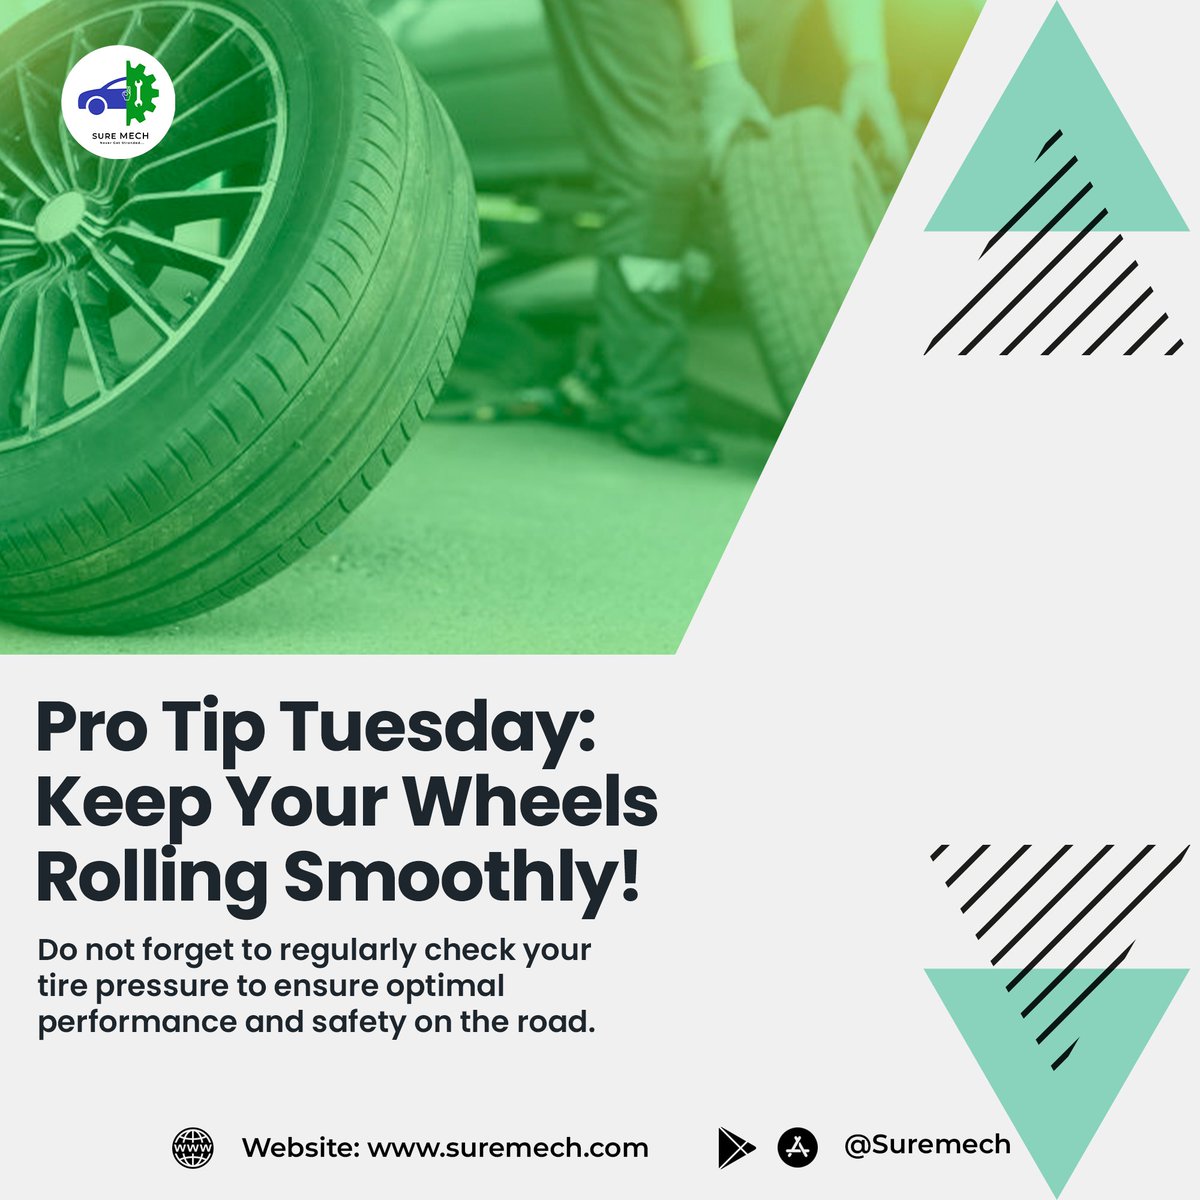 🛠️ Pro Tip Tuesday: Keep your wheels rolling smoothly! ✅ Don't forget to regularly check your tire pressure to ensure optimal performance and safety on the road. 
Need a hand? Sure Mech's got you covered! 🚗💨 
#protiptuesday #CarCare #suremech